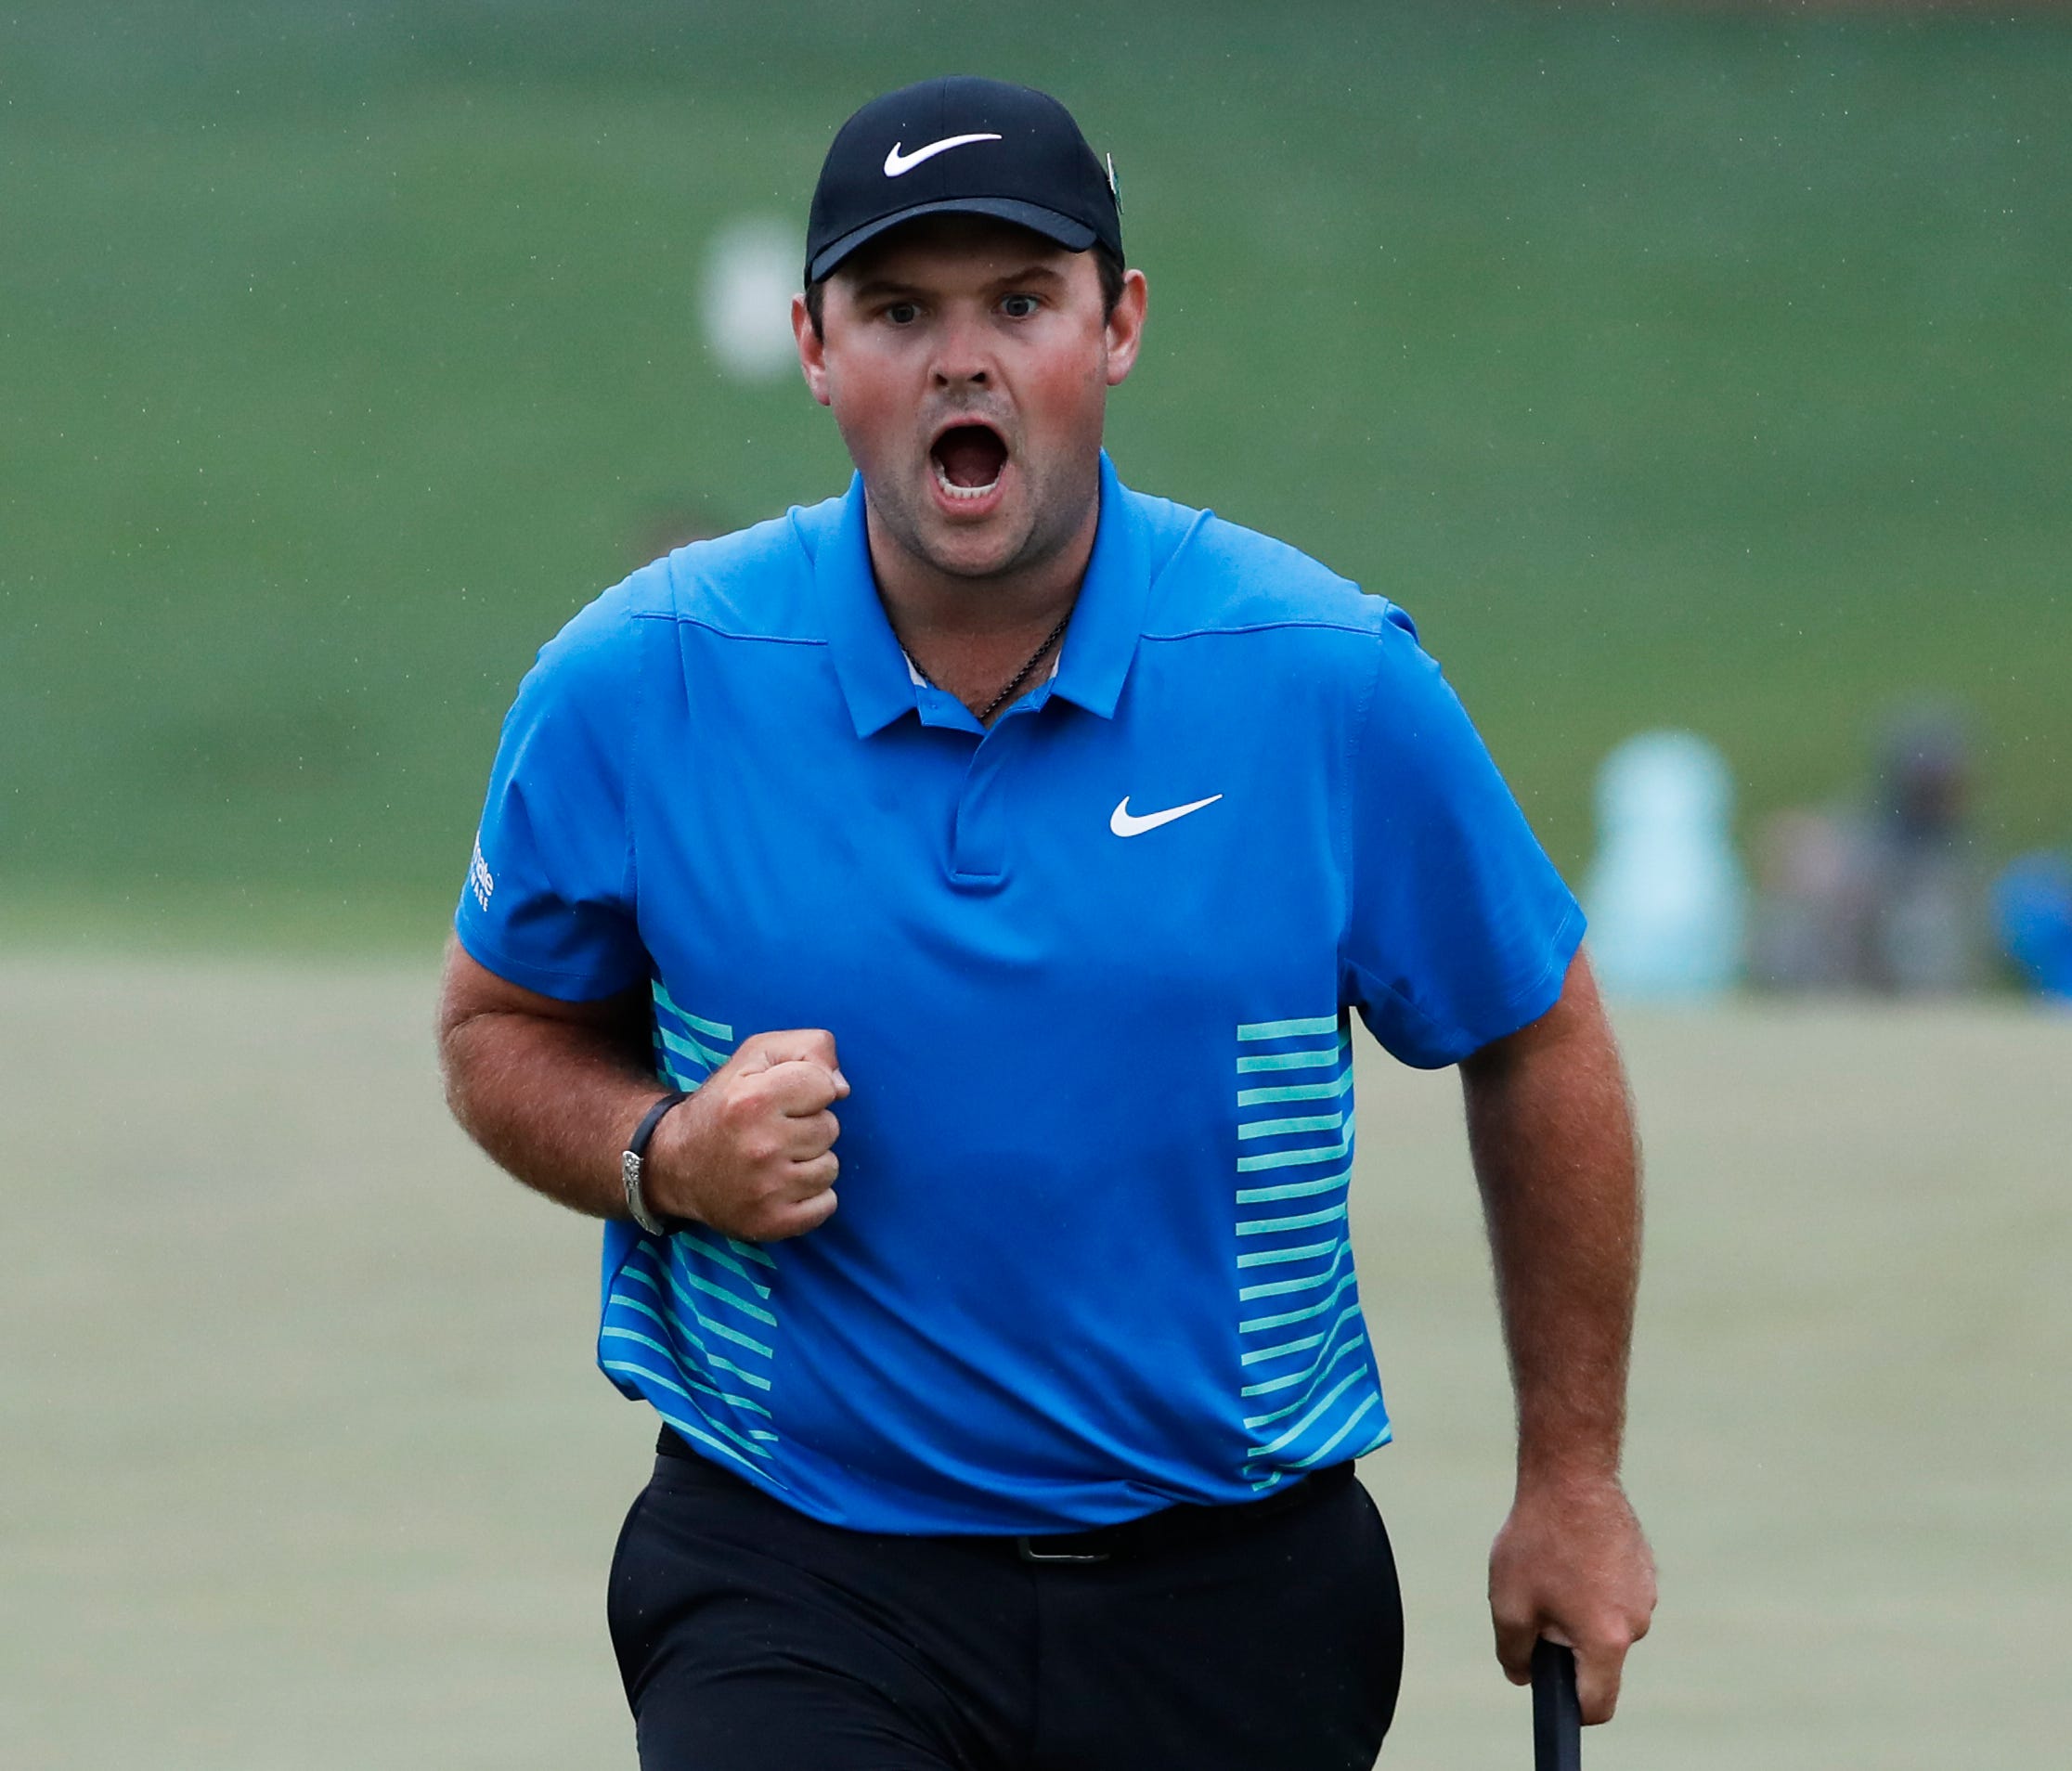 On the ninth, Patrick Reed reacts after making a birdie putt during the third round at the Masters golf tournament Saturday, April 7.